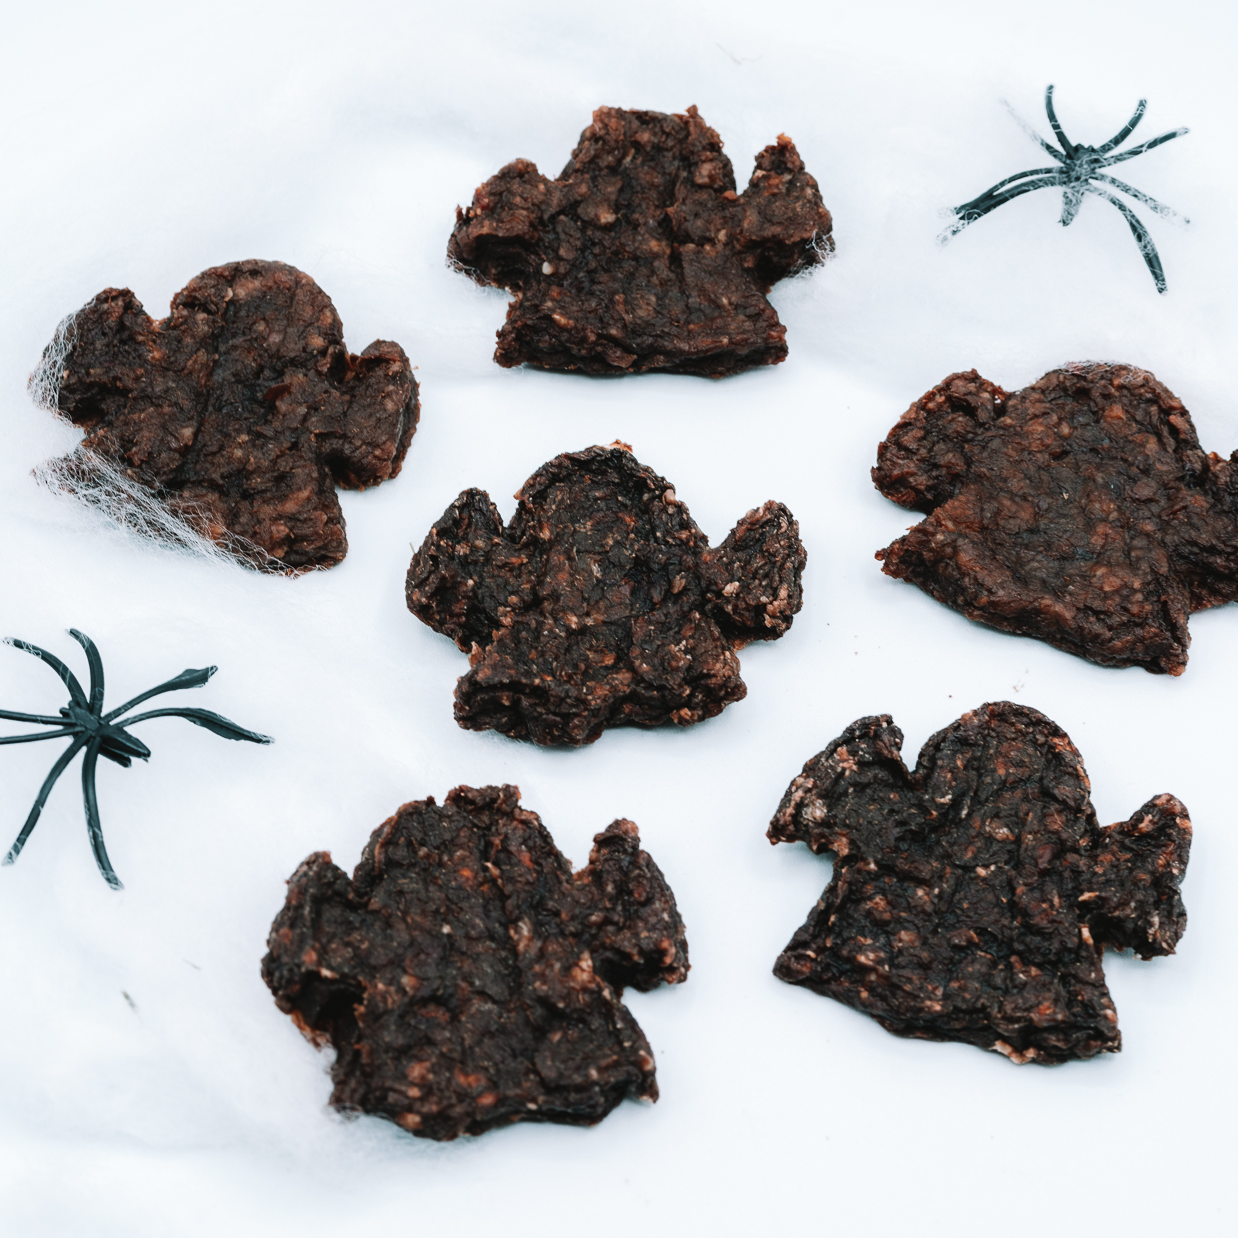 Dehydrated Spooky Bison Patties